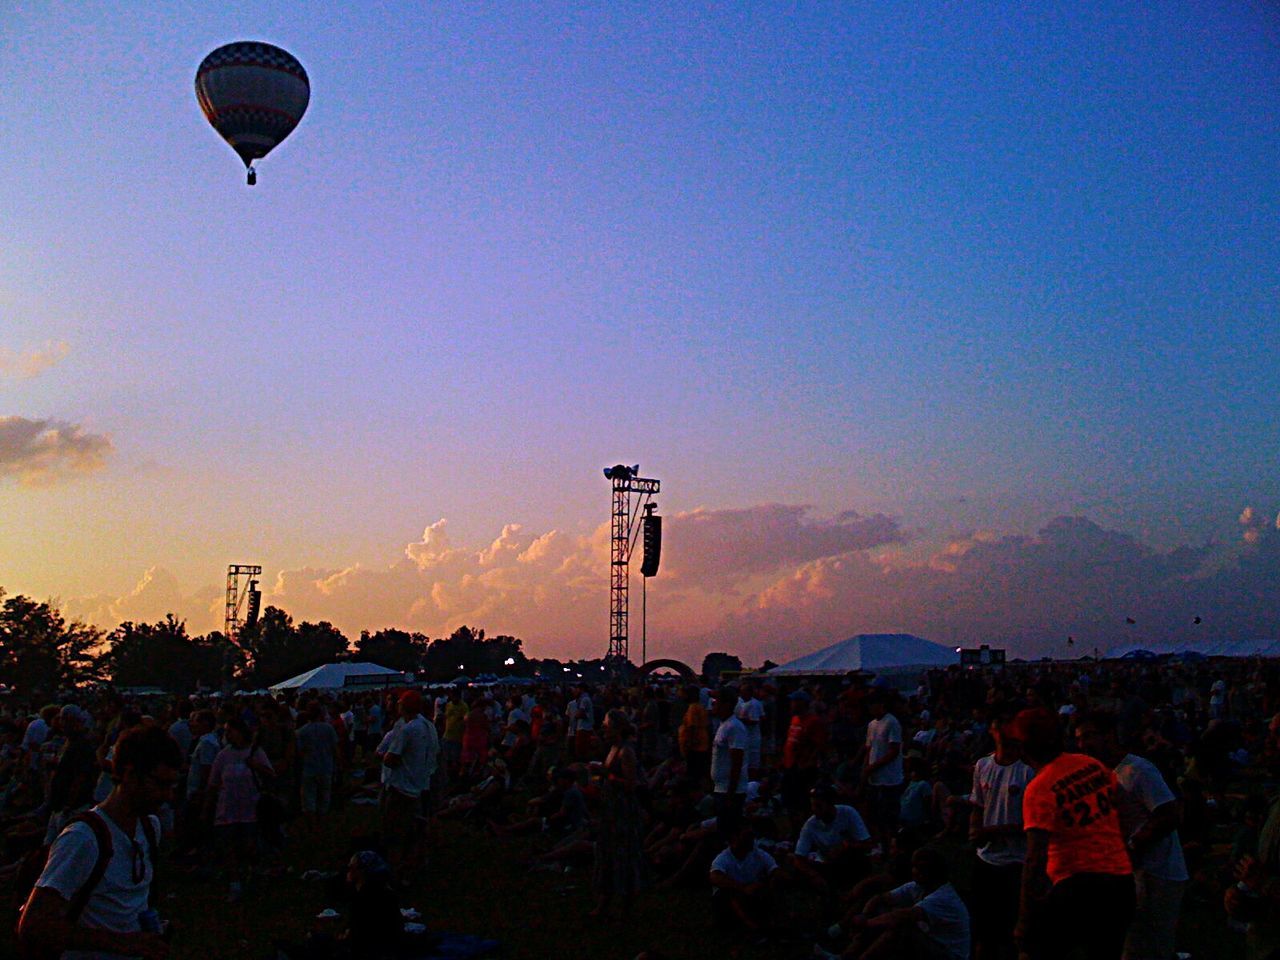 PEOPLE IN HOT AIR BALLOONS